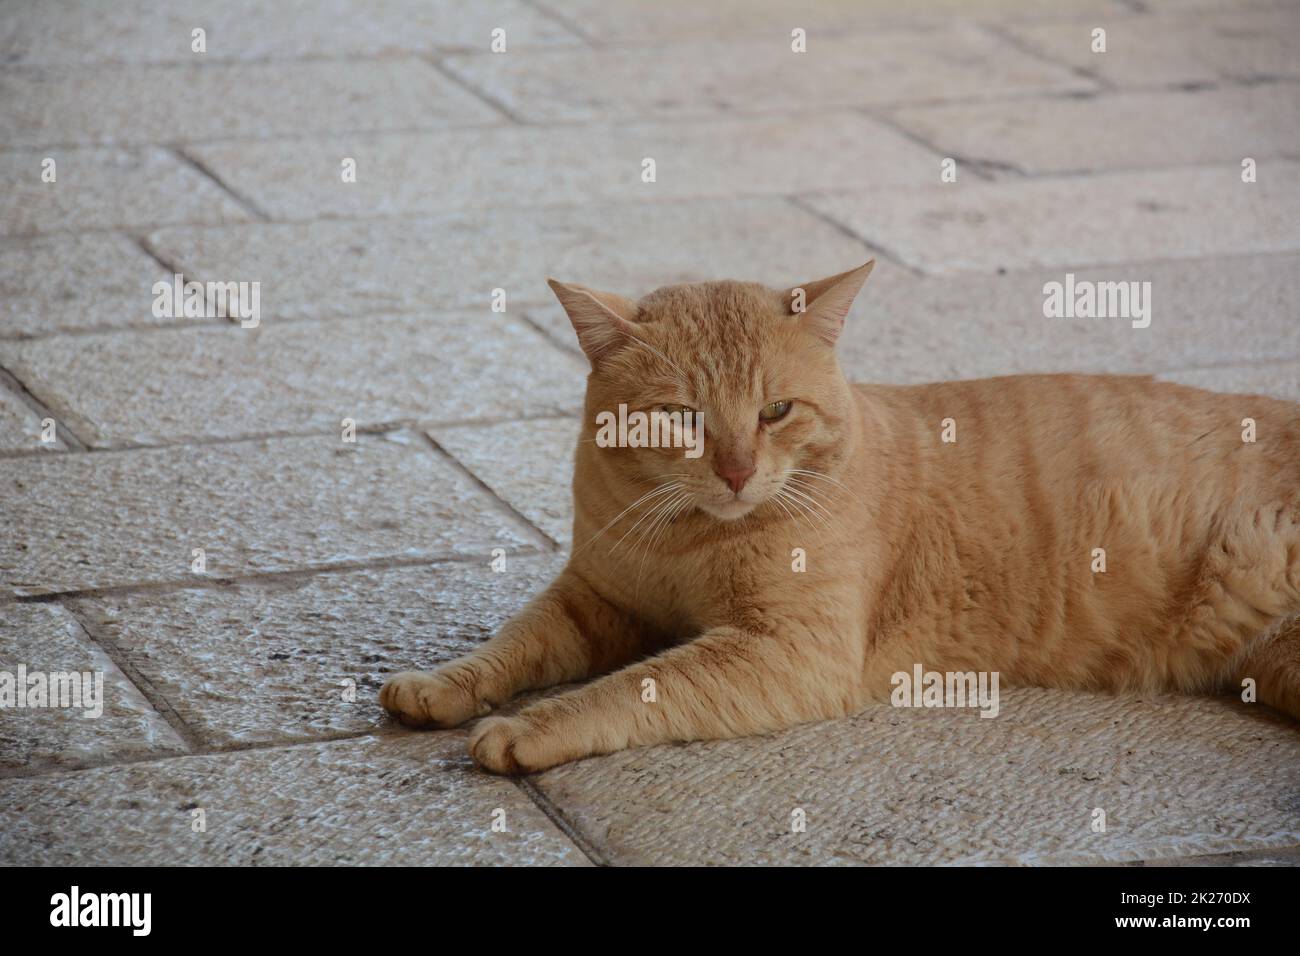 Red strolling cat is lying on the pavement. Cute animals. City fauna. Stock Photo